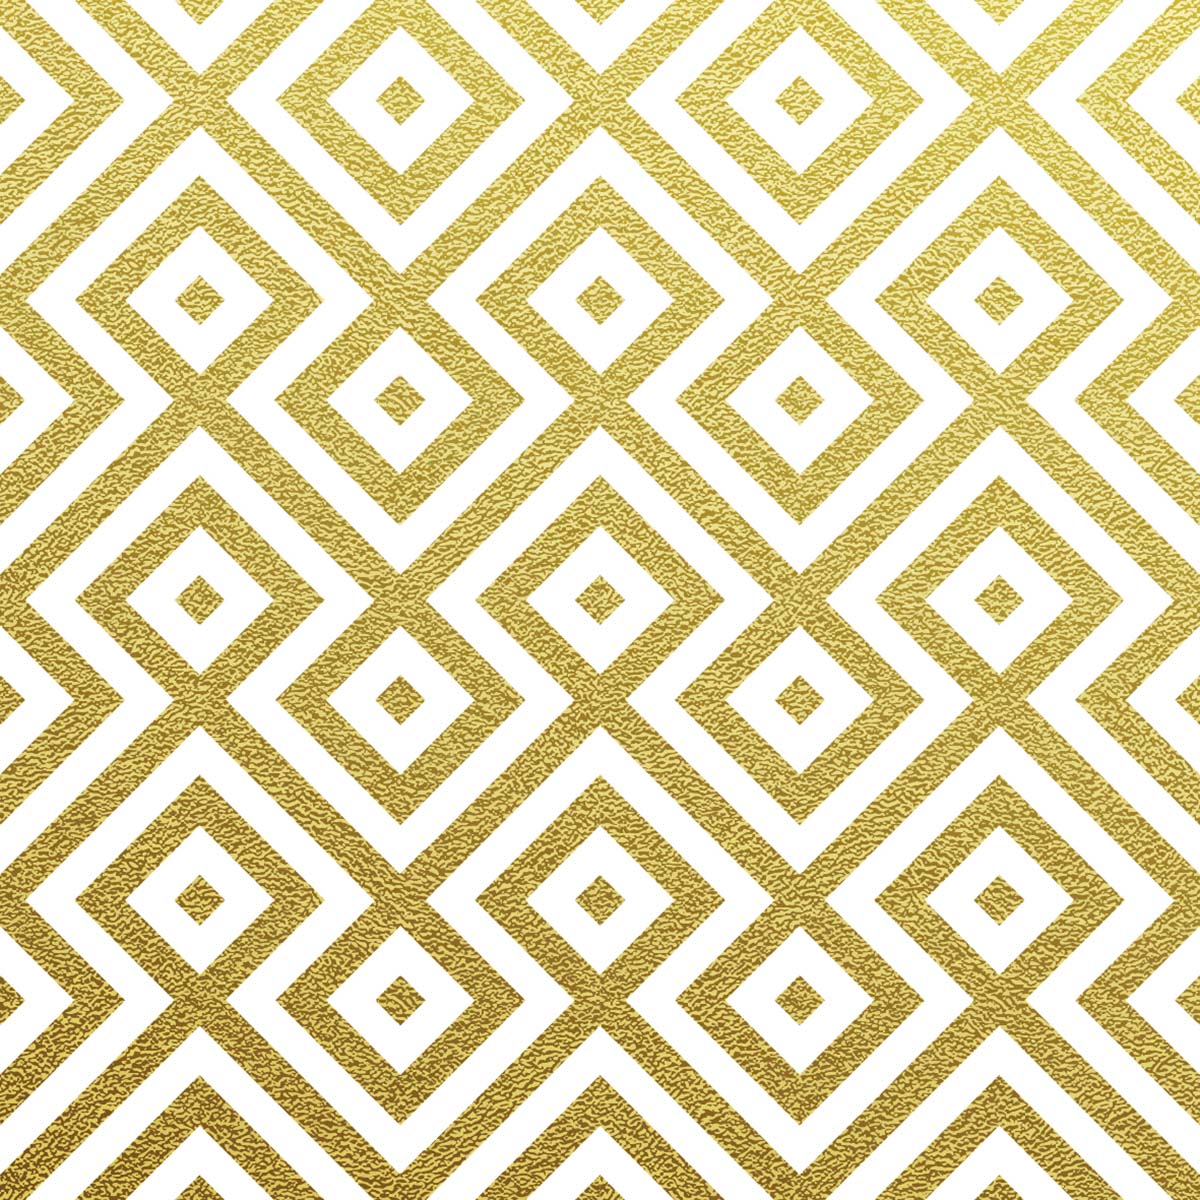 A pattern of gold squares